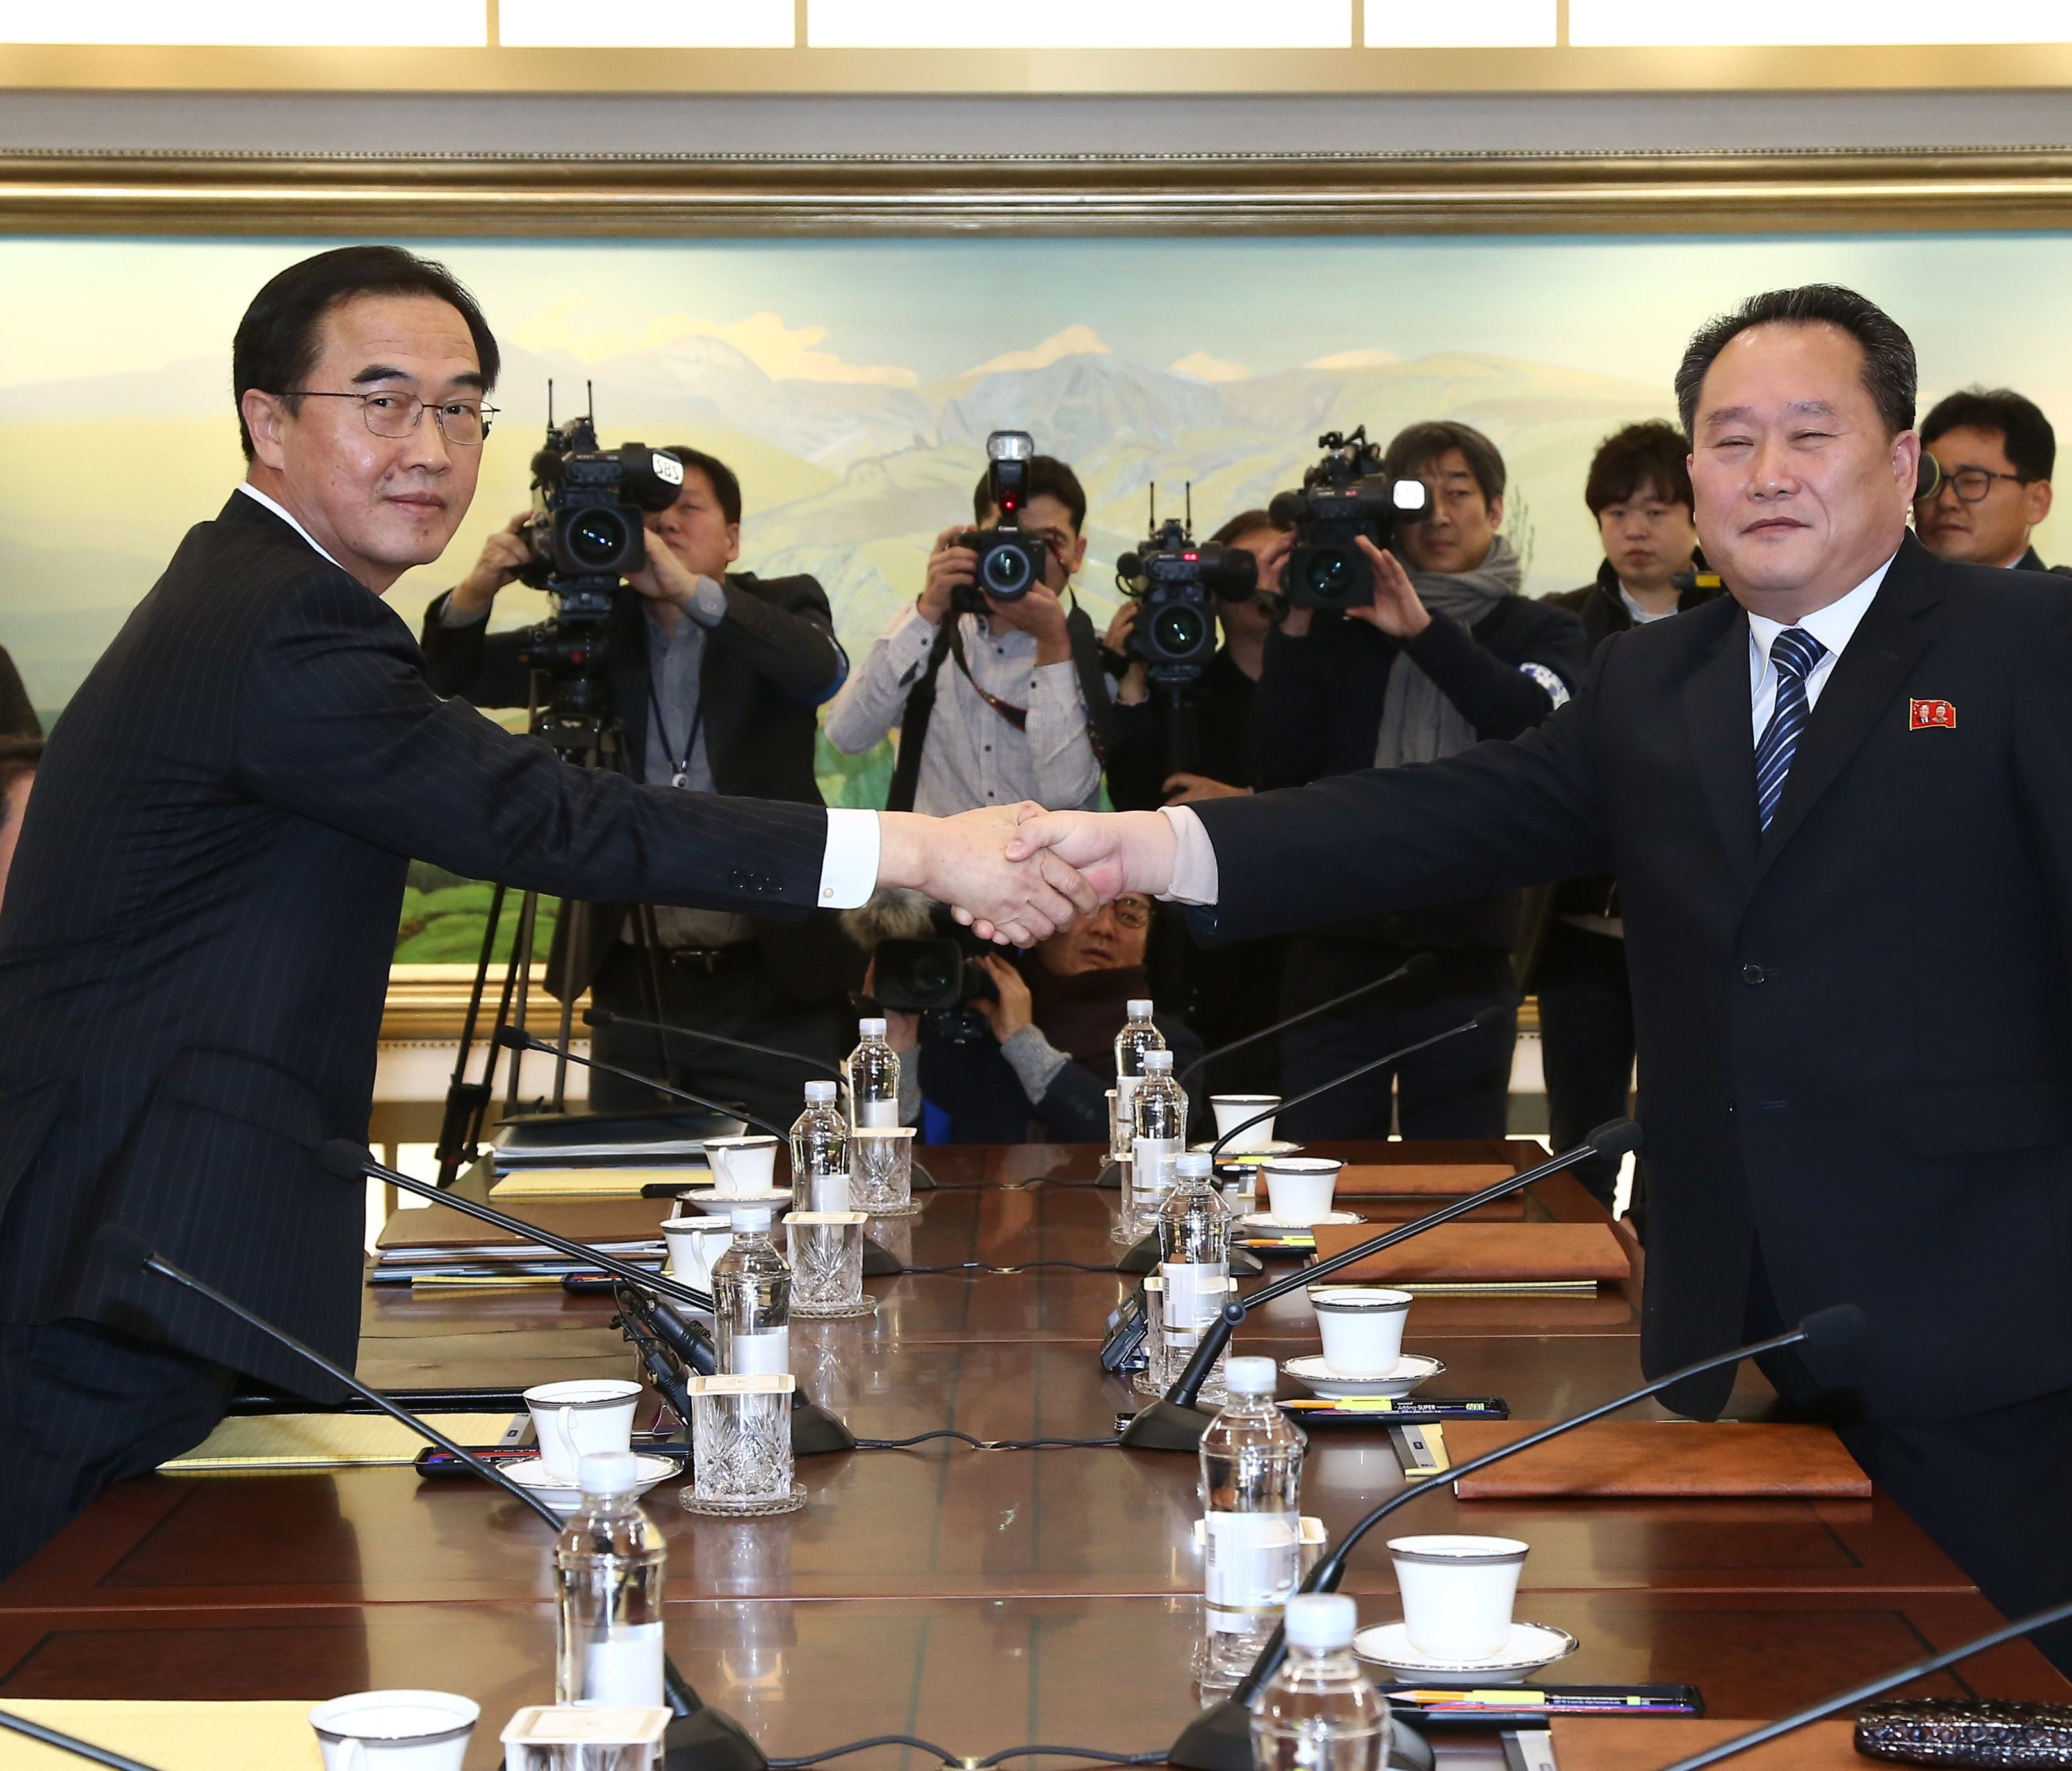 South Korean Unification Minister and chief delegate Cho Myoung-gyon (L) shakes hands with North Korea's chief delegate Ri Son-gwon (R) prior to their meeting in the truce village of Panmunjom, North Korea.